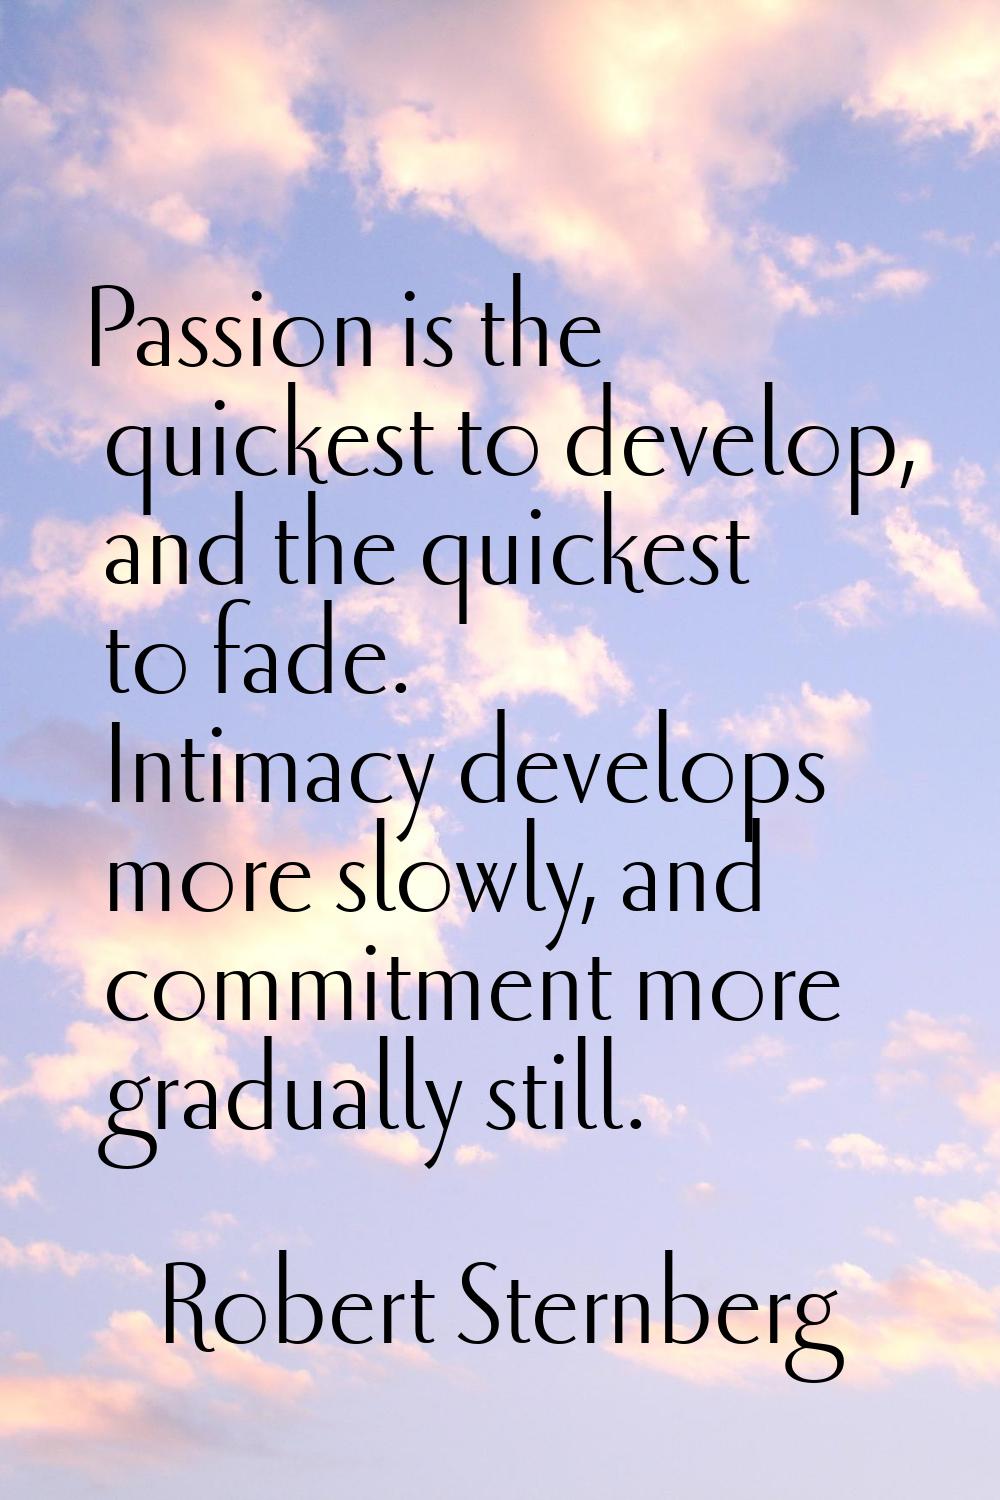 Passion is the quickest to develop, and the quickest to fade. Intimacy develops more slowly, and co